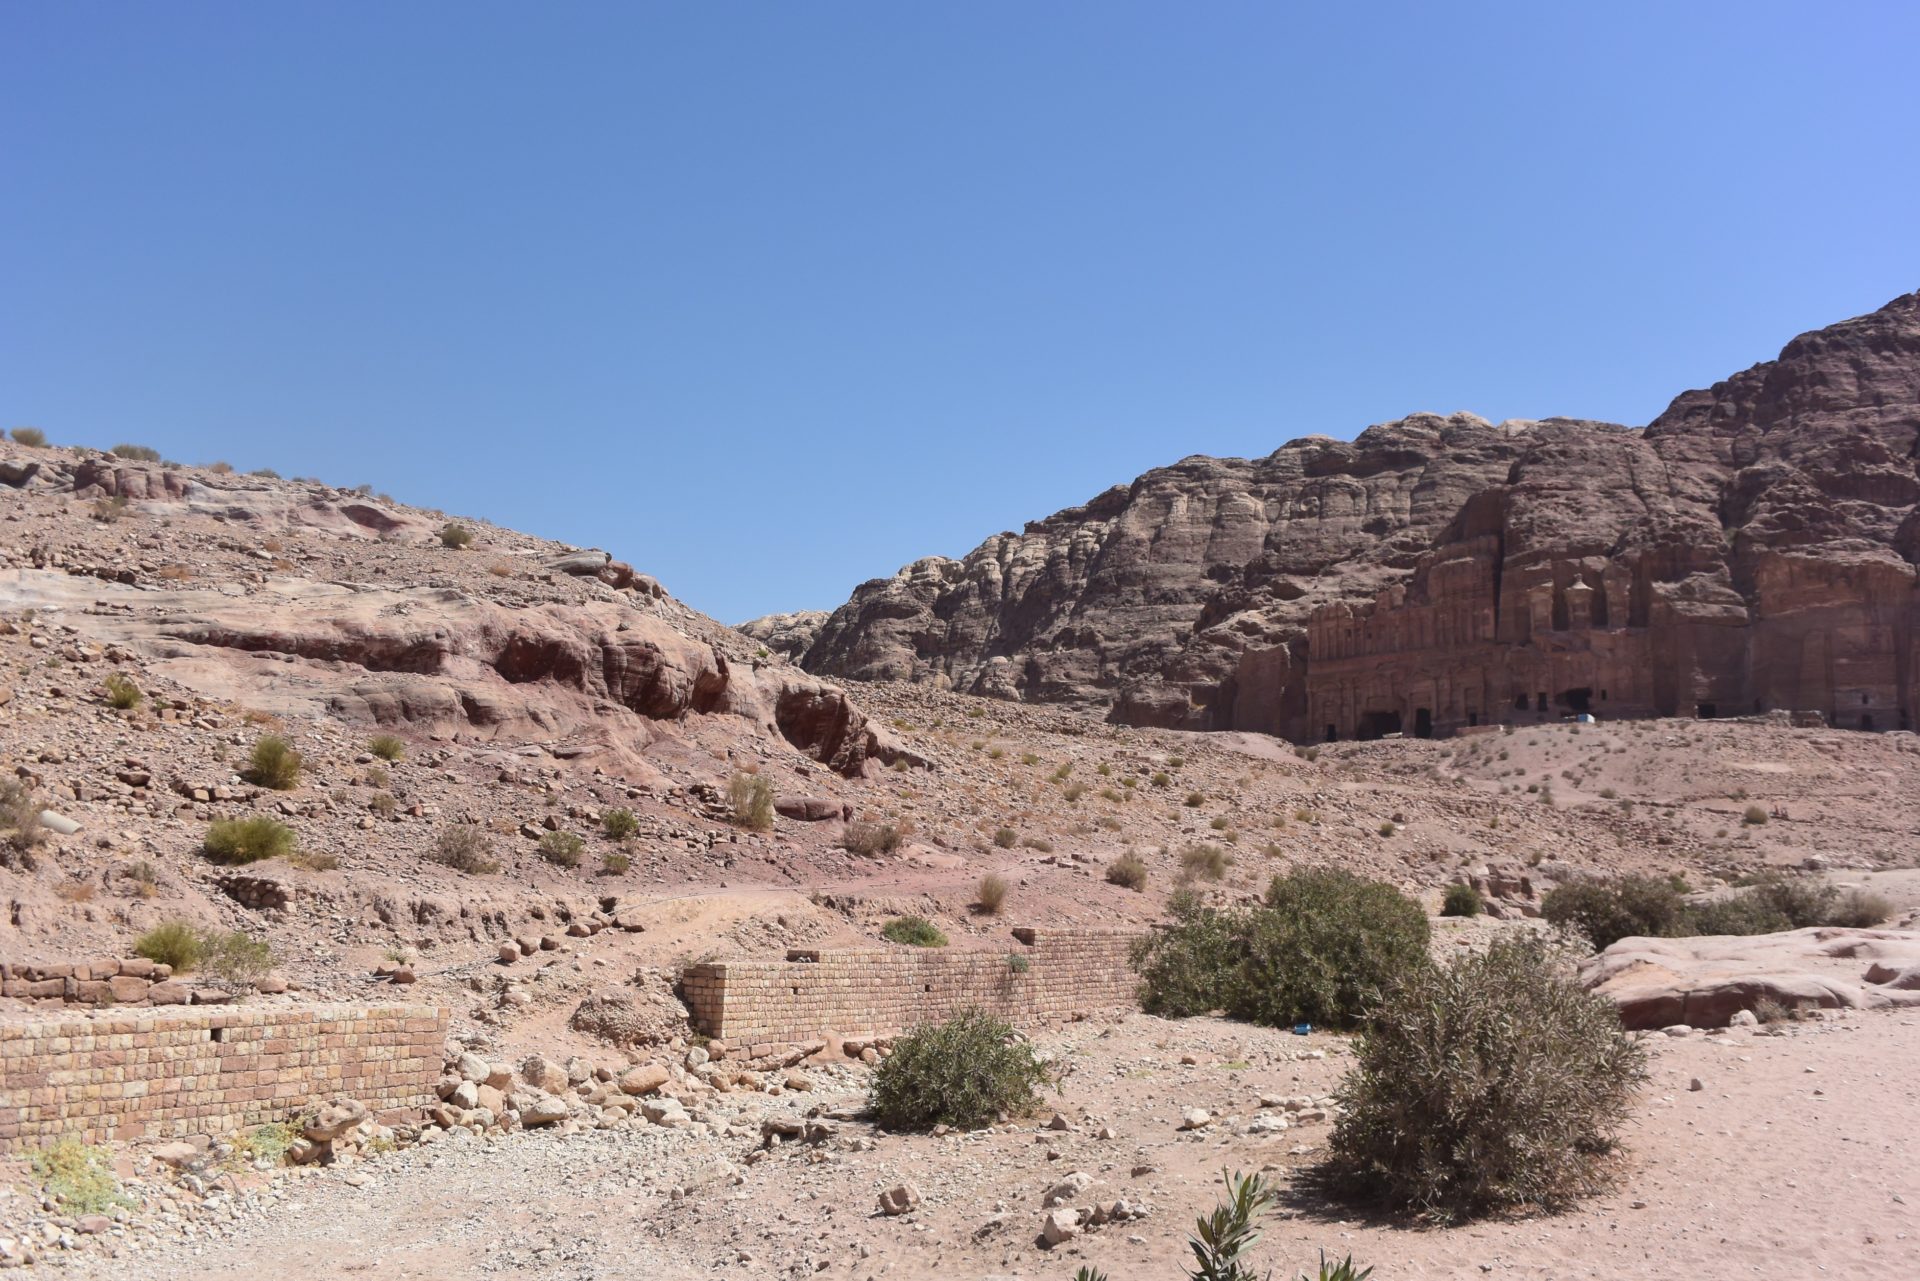 a rocky landscape with a building in the middle